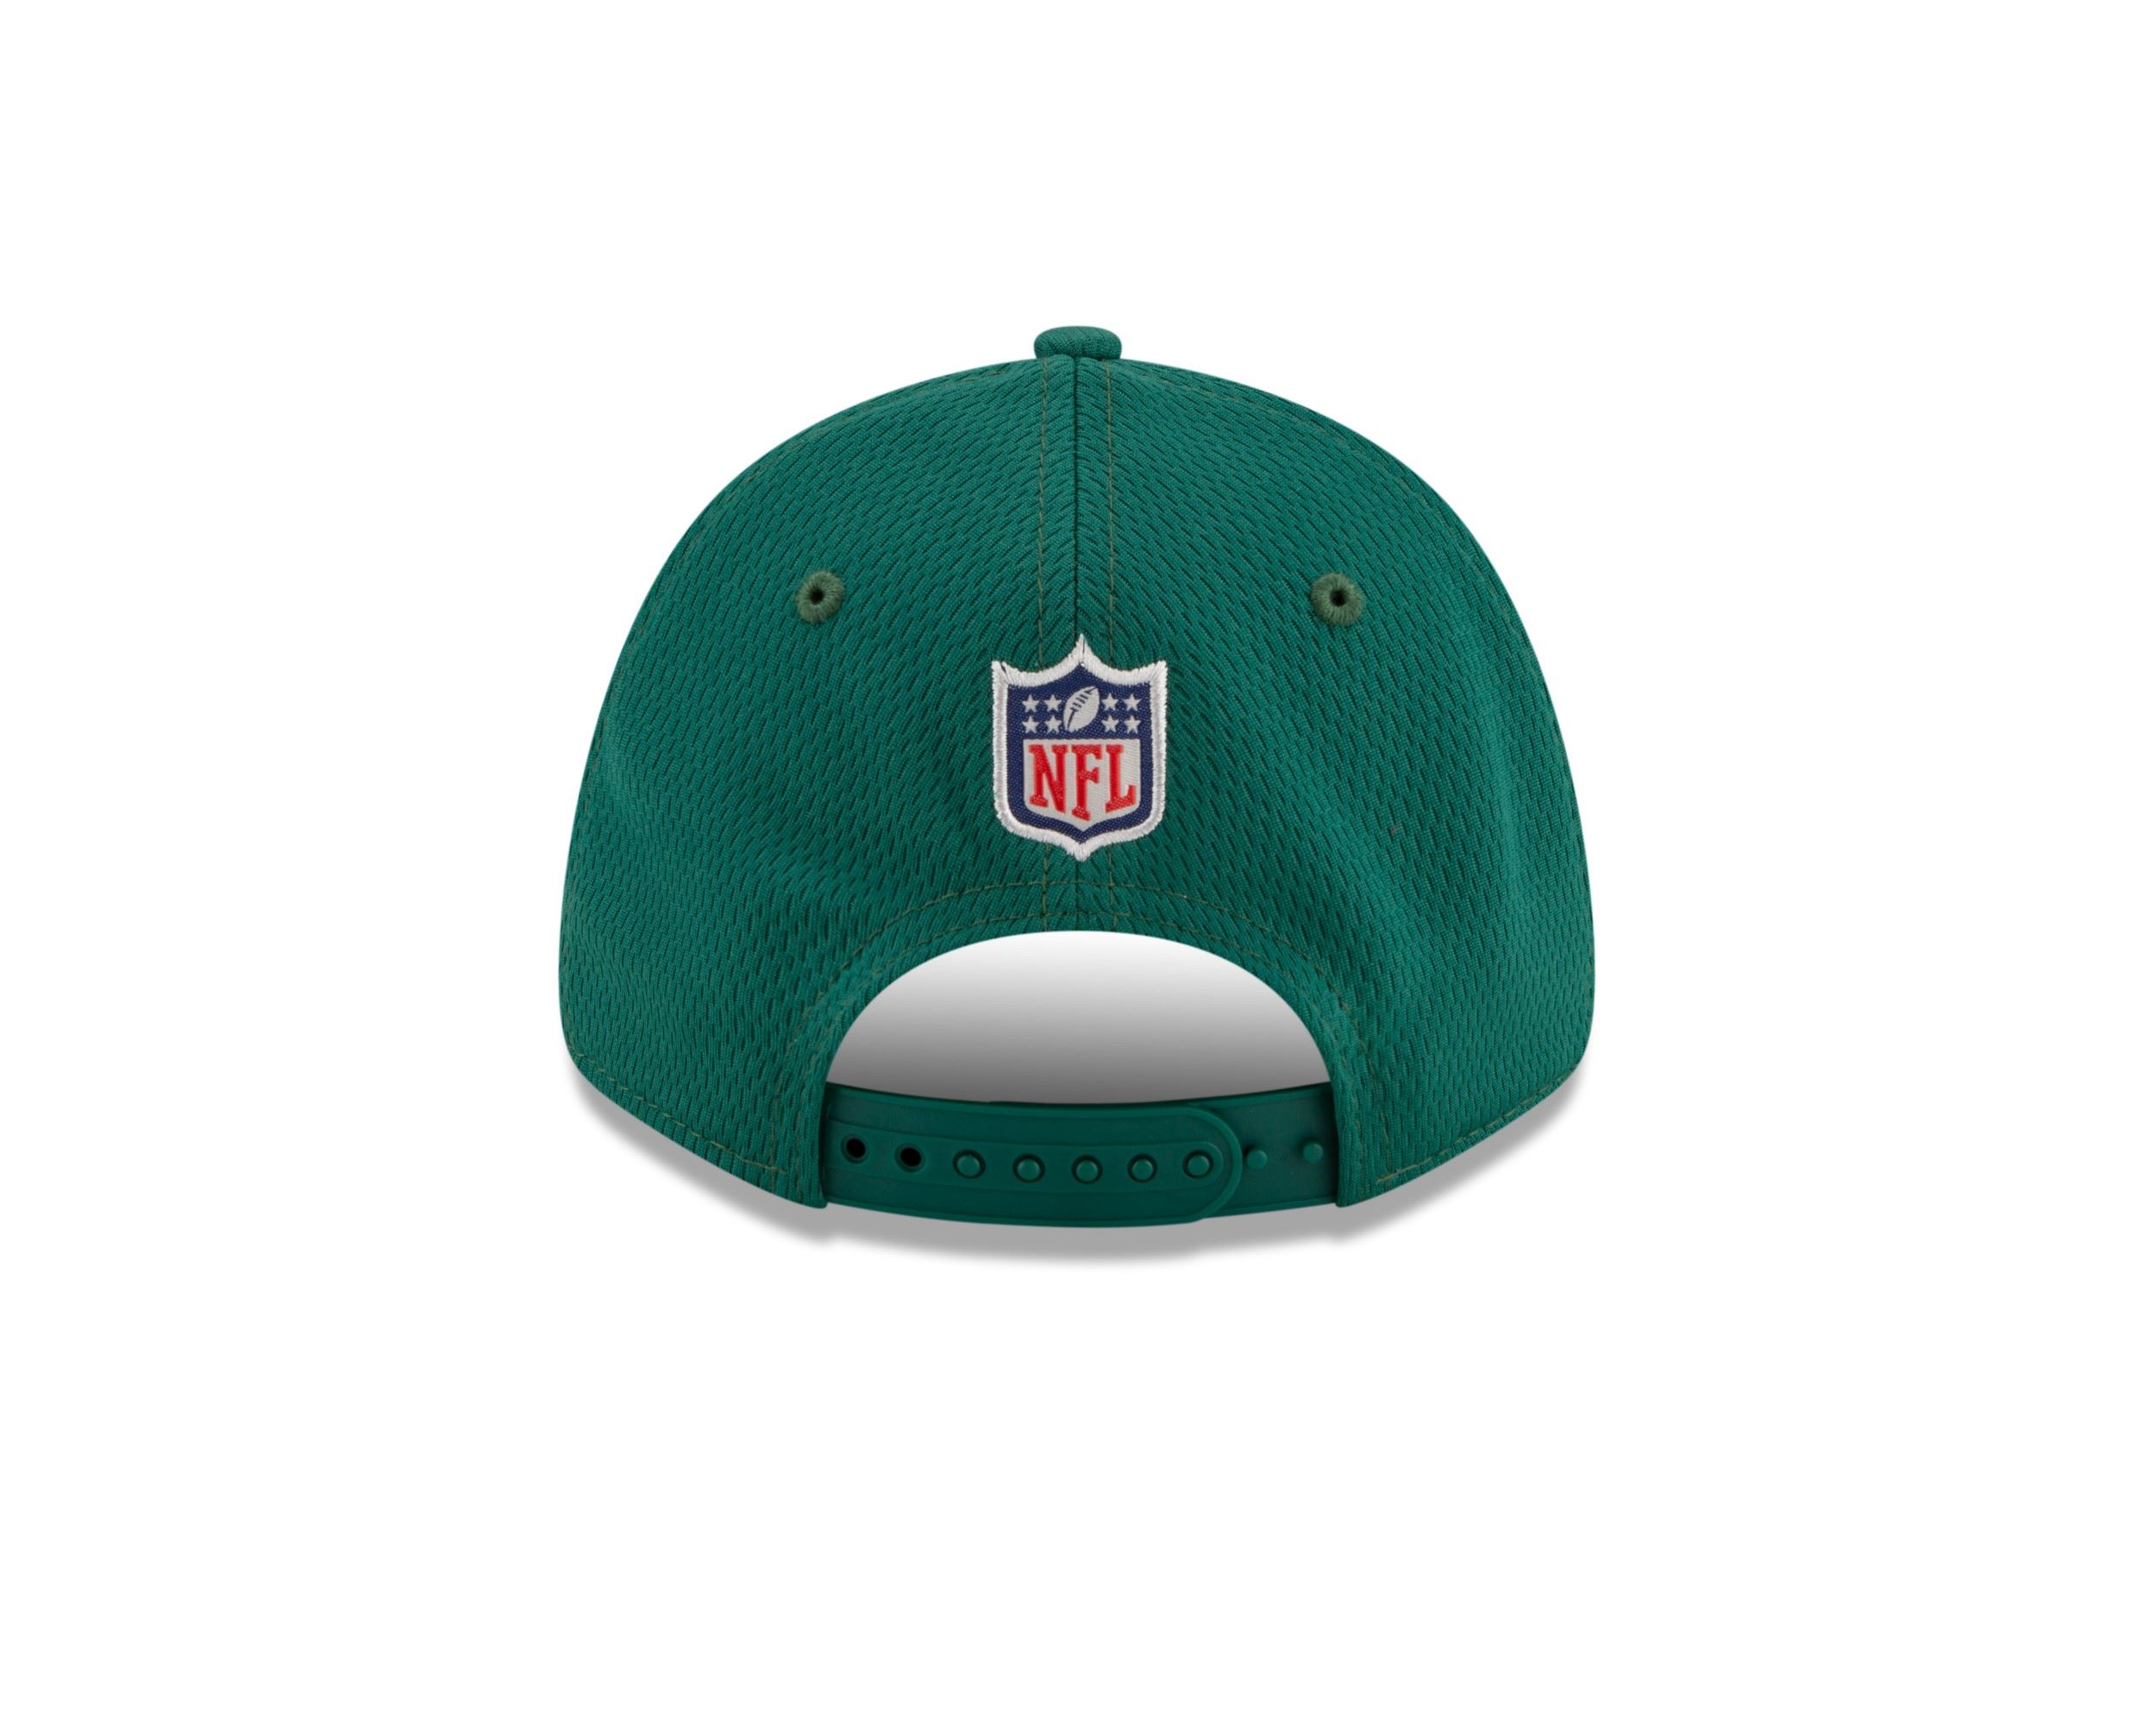 New York Jets NFL 2021 Sideline Road Green 9Forty Stretch Snap Cap New Era